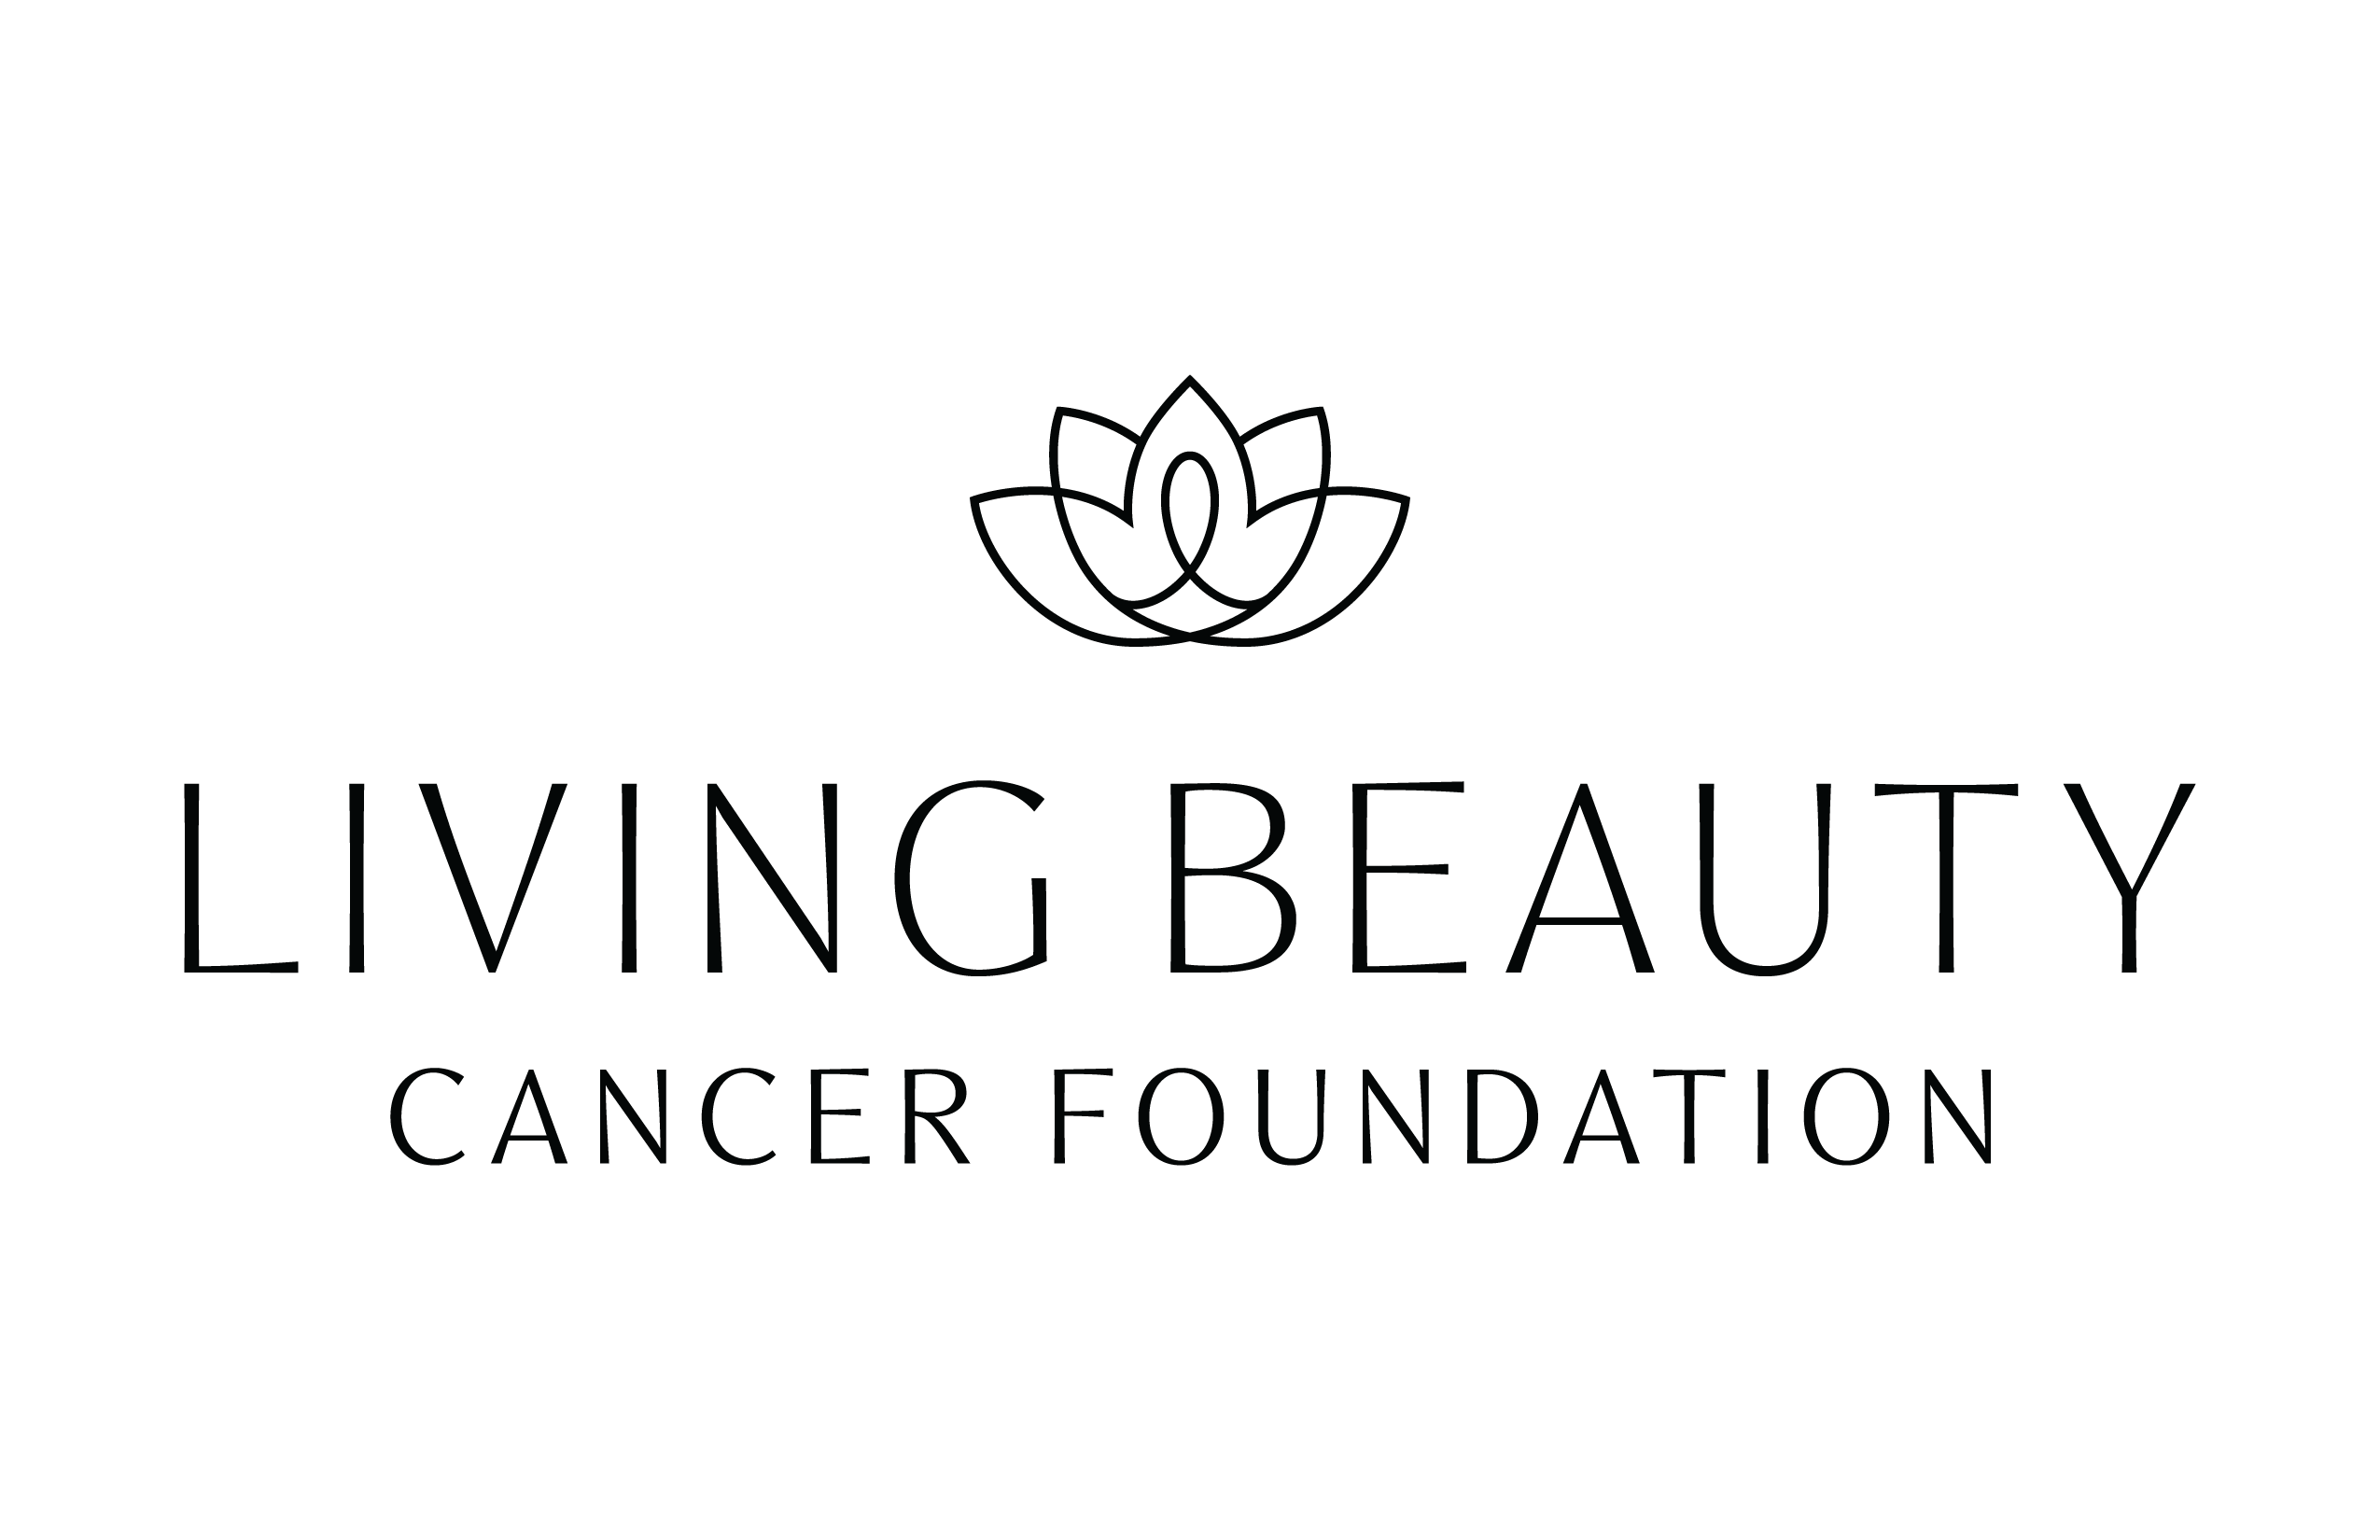 Load video: introductory video of the living beauty cancer foundation